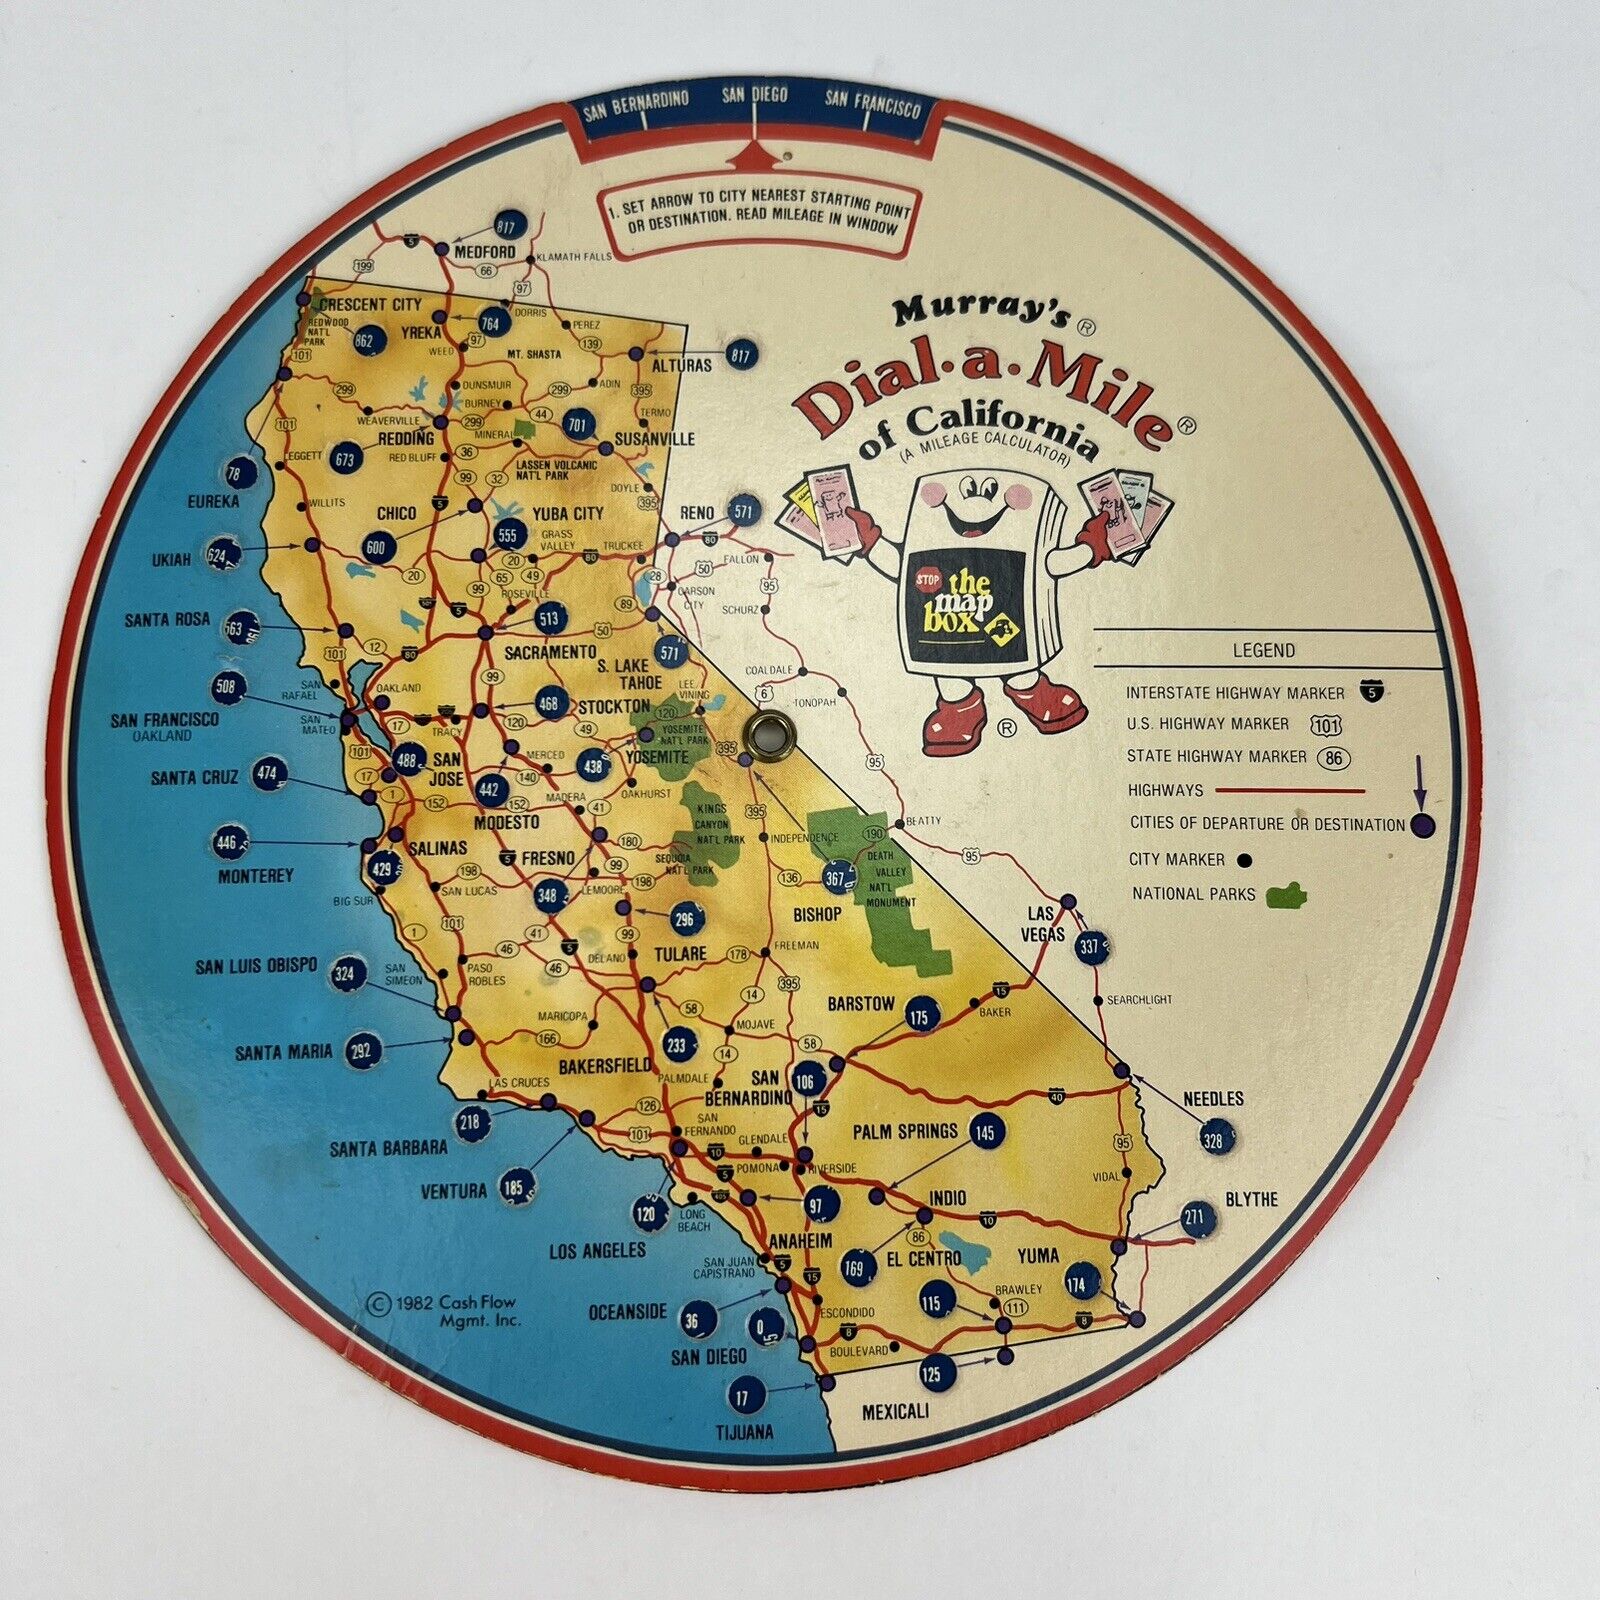 Vintage 1982 Murray\'s Dial-A-Mile California Mileage Calculator, Travel Tips